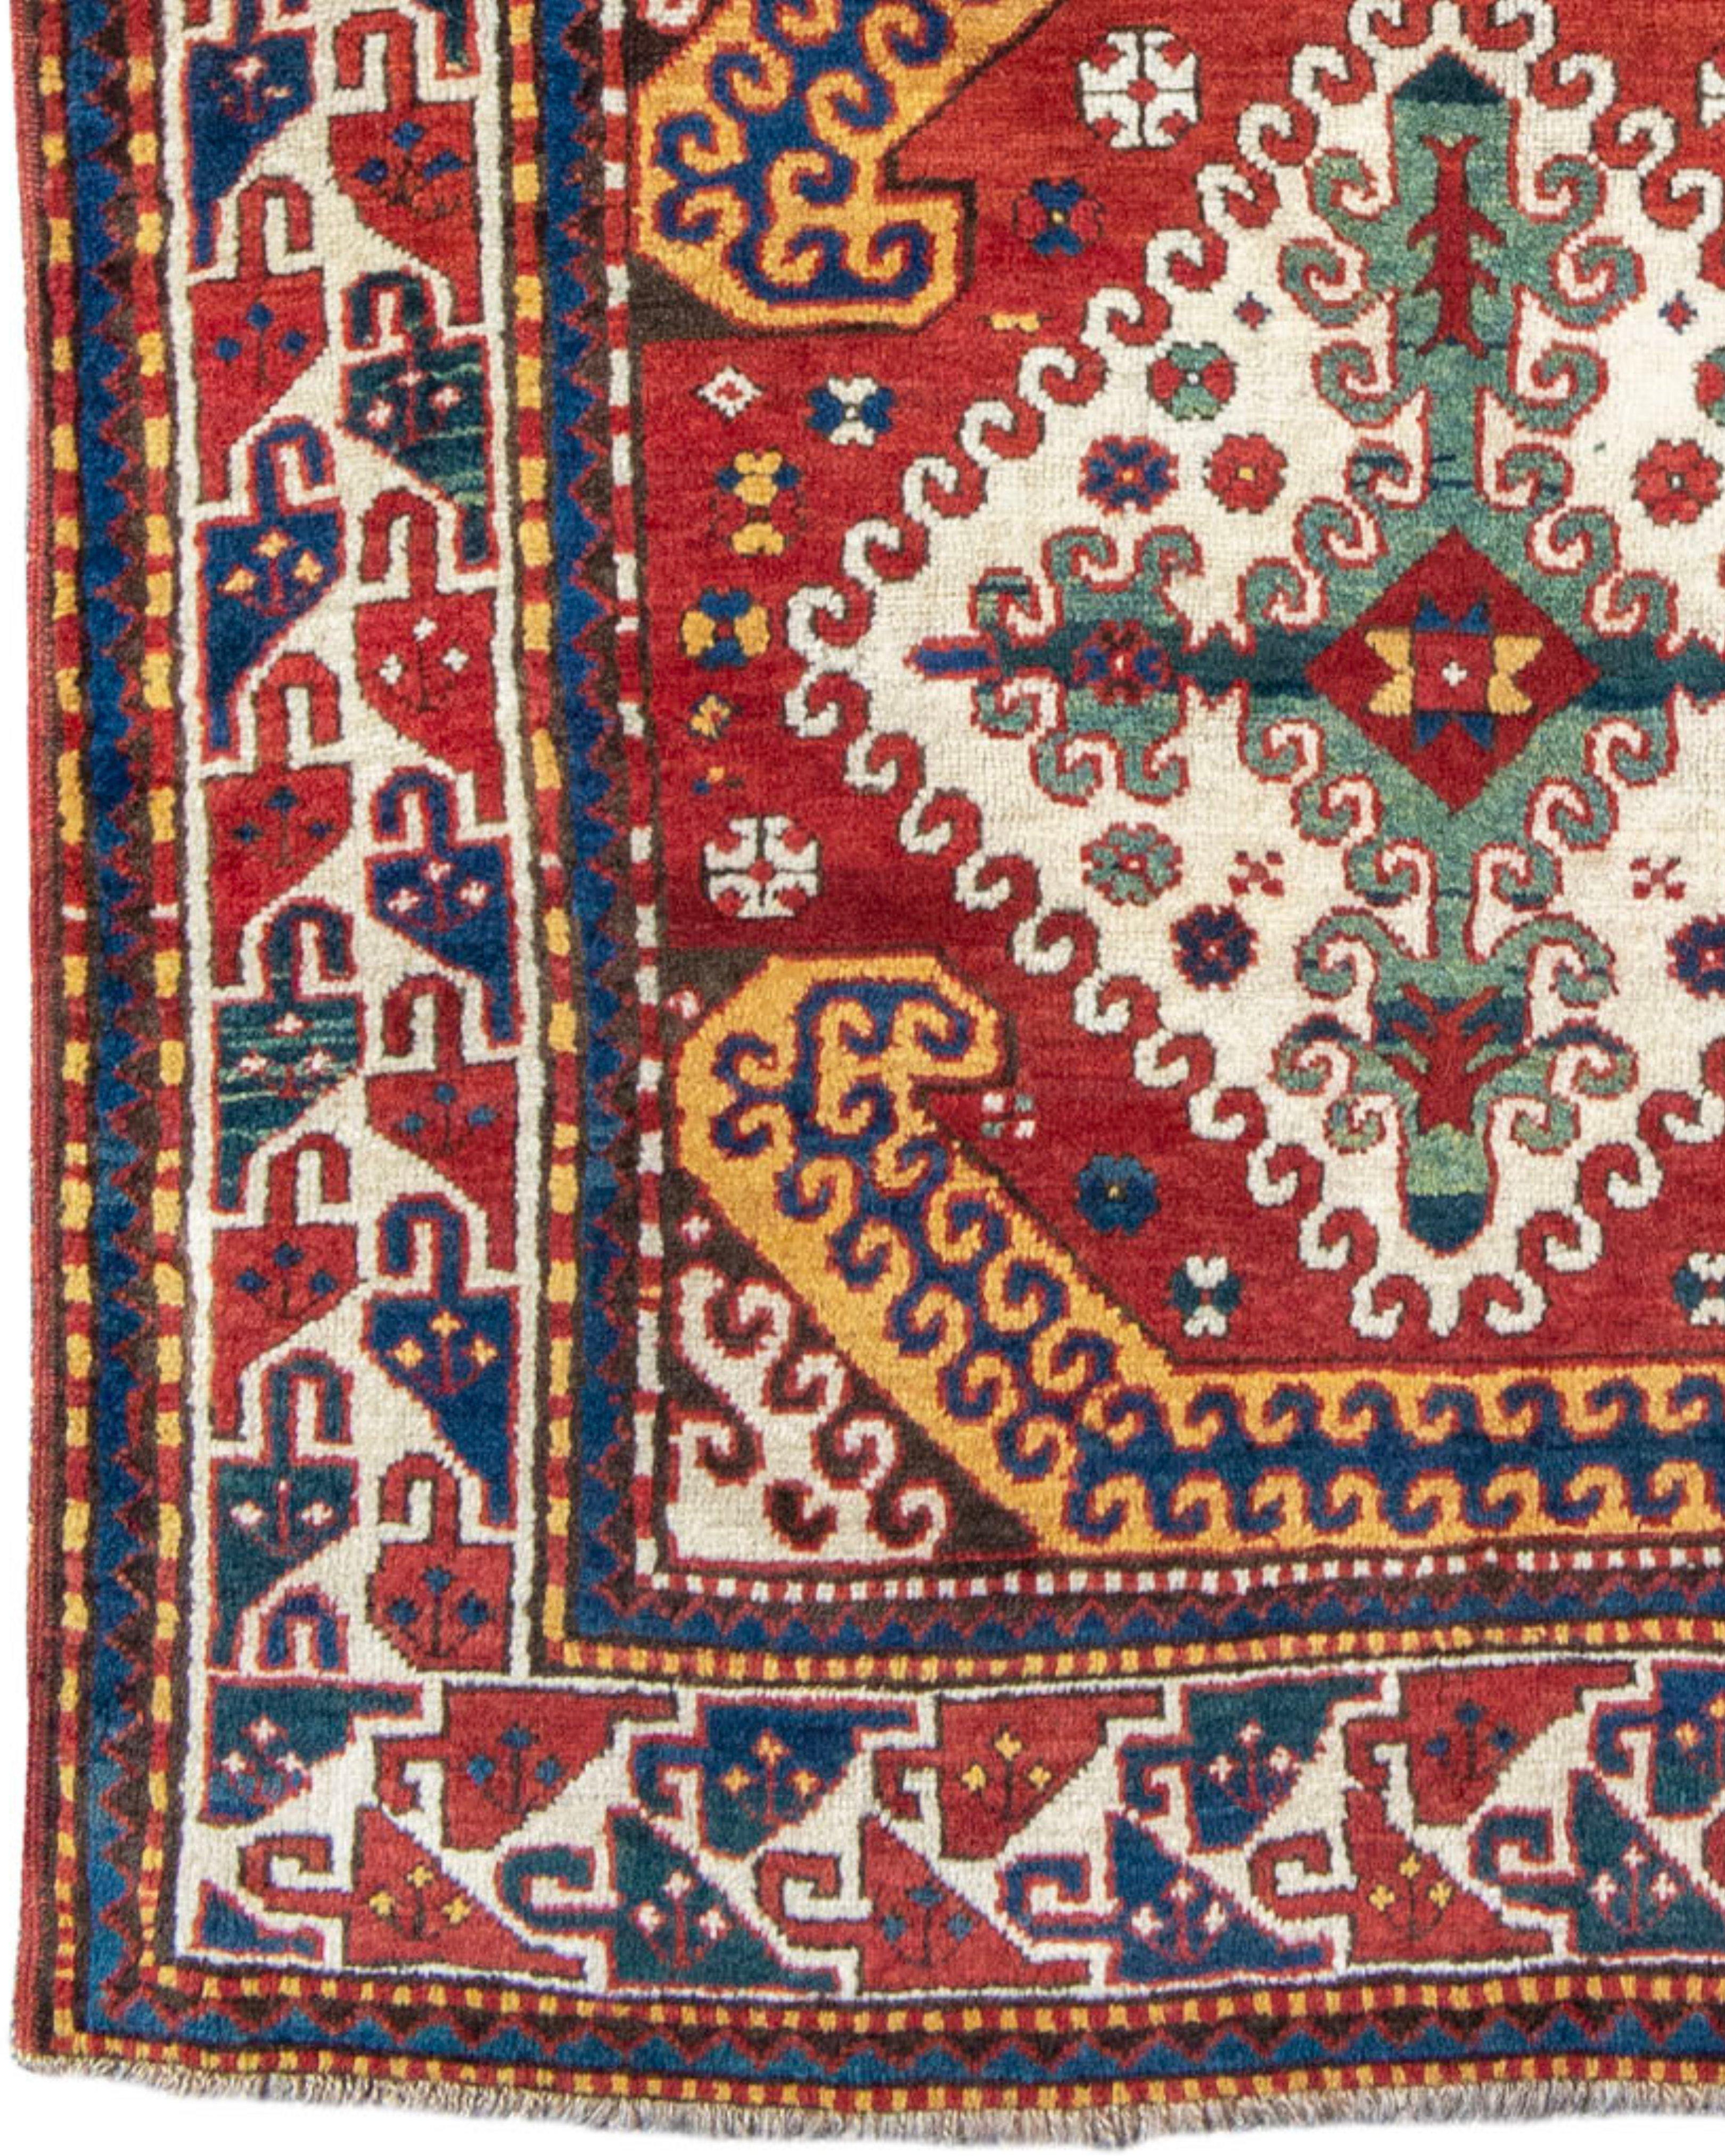 Antique Karabagh Rug, 19th Century In Excellent Condition For Sale In San Francisco, CA